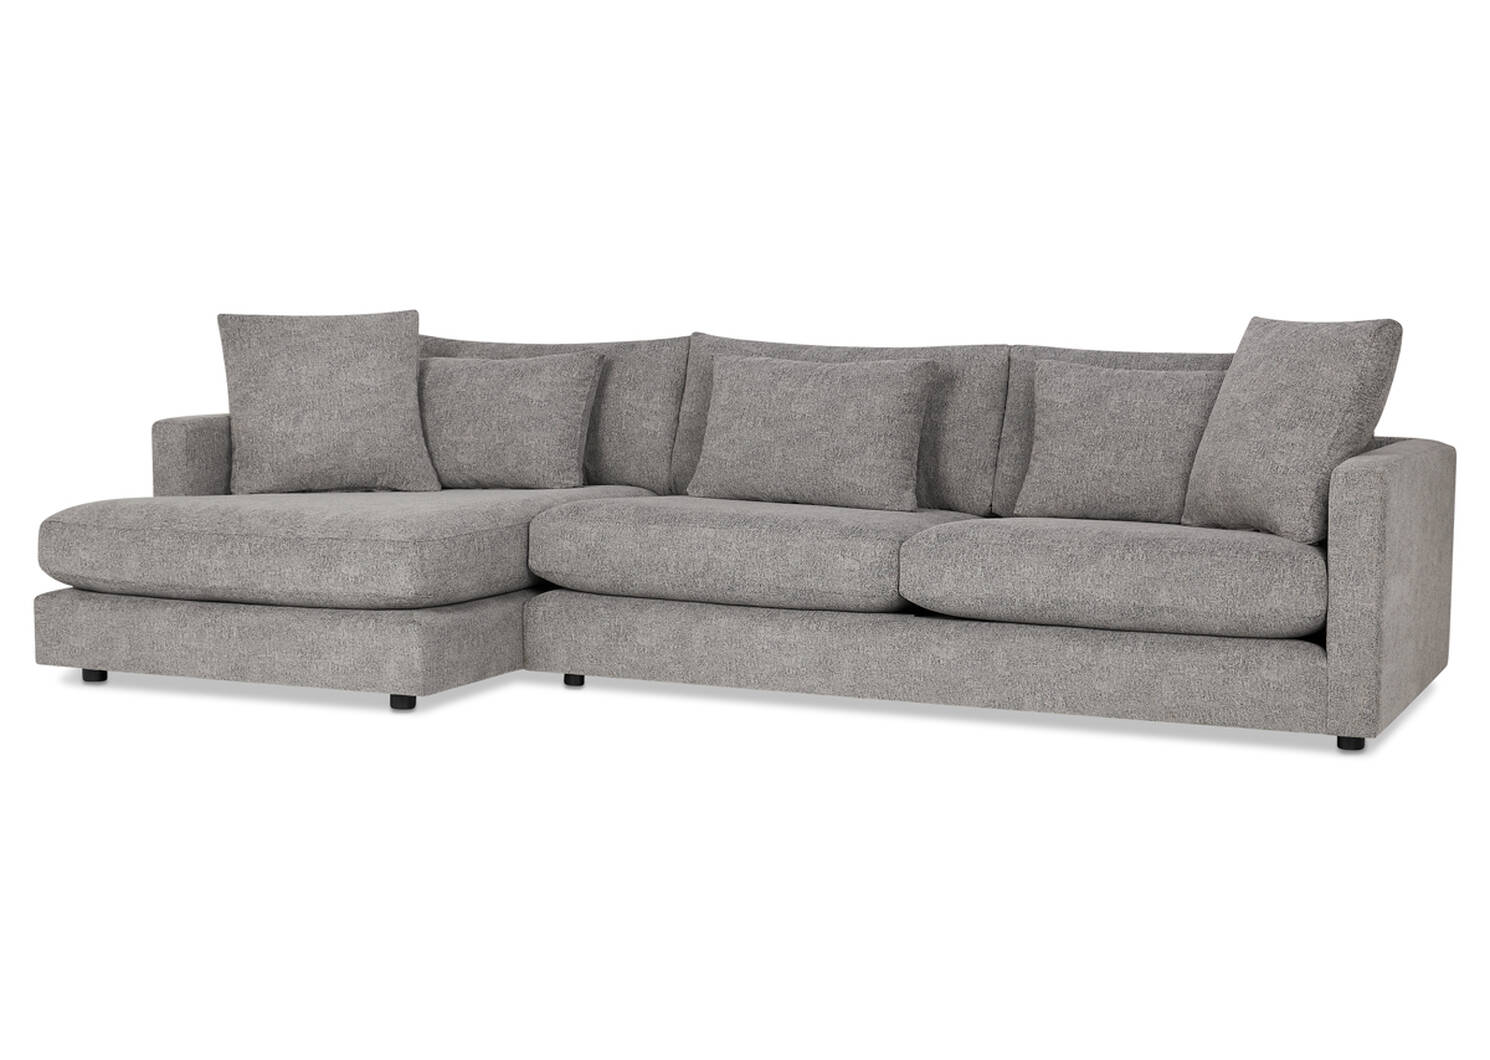 Berg Sofa Chaise -Aiden Sterling, LCF